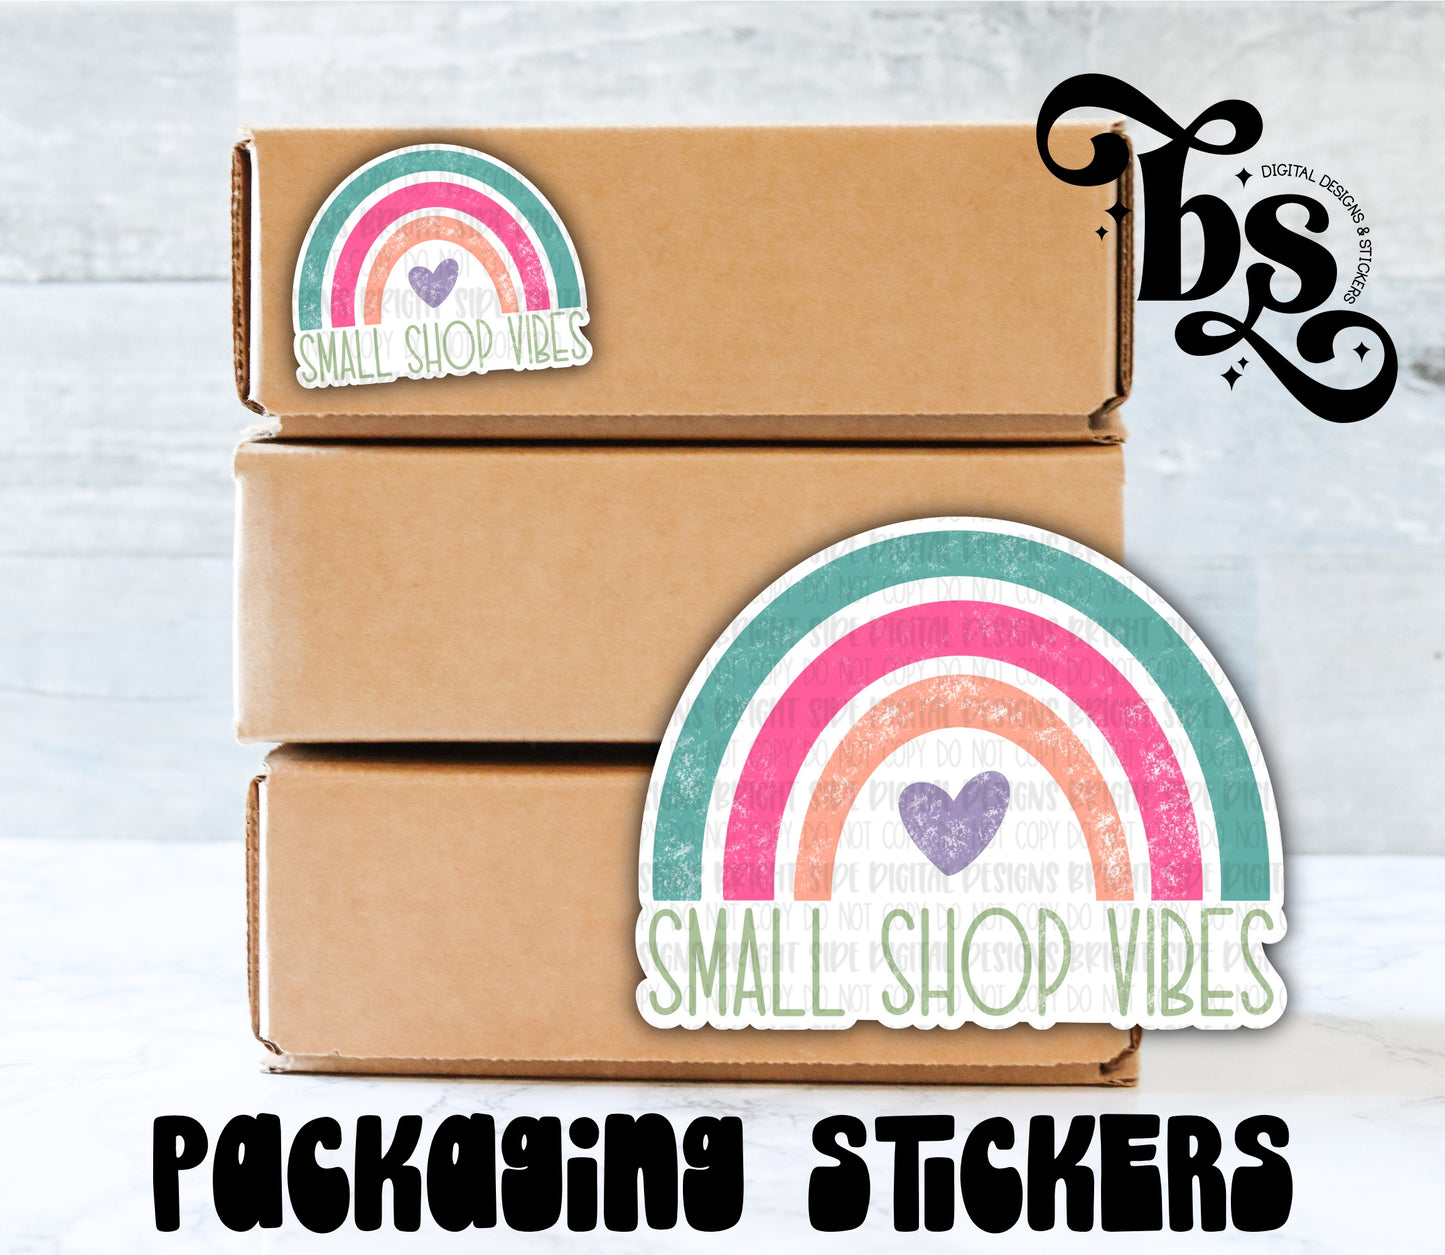 Small Shop Vibes Rainbow Packaging Sticker